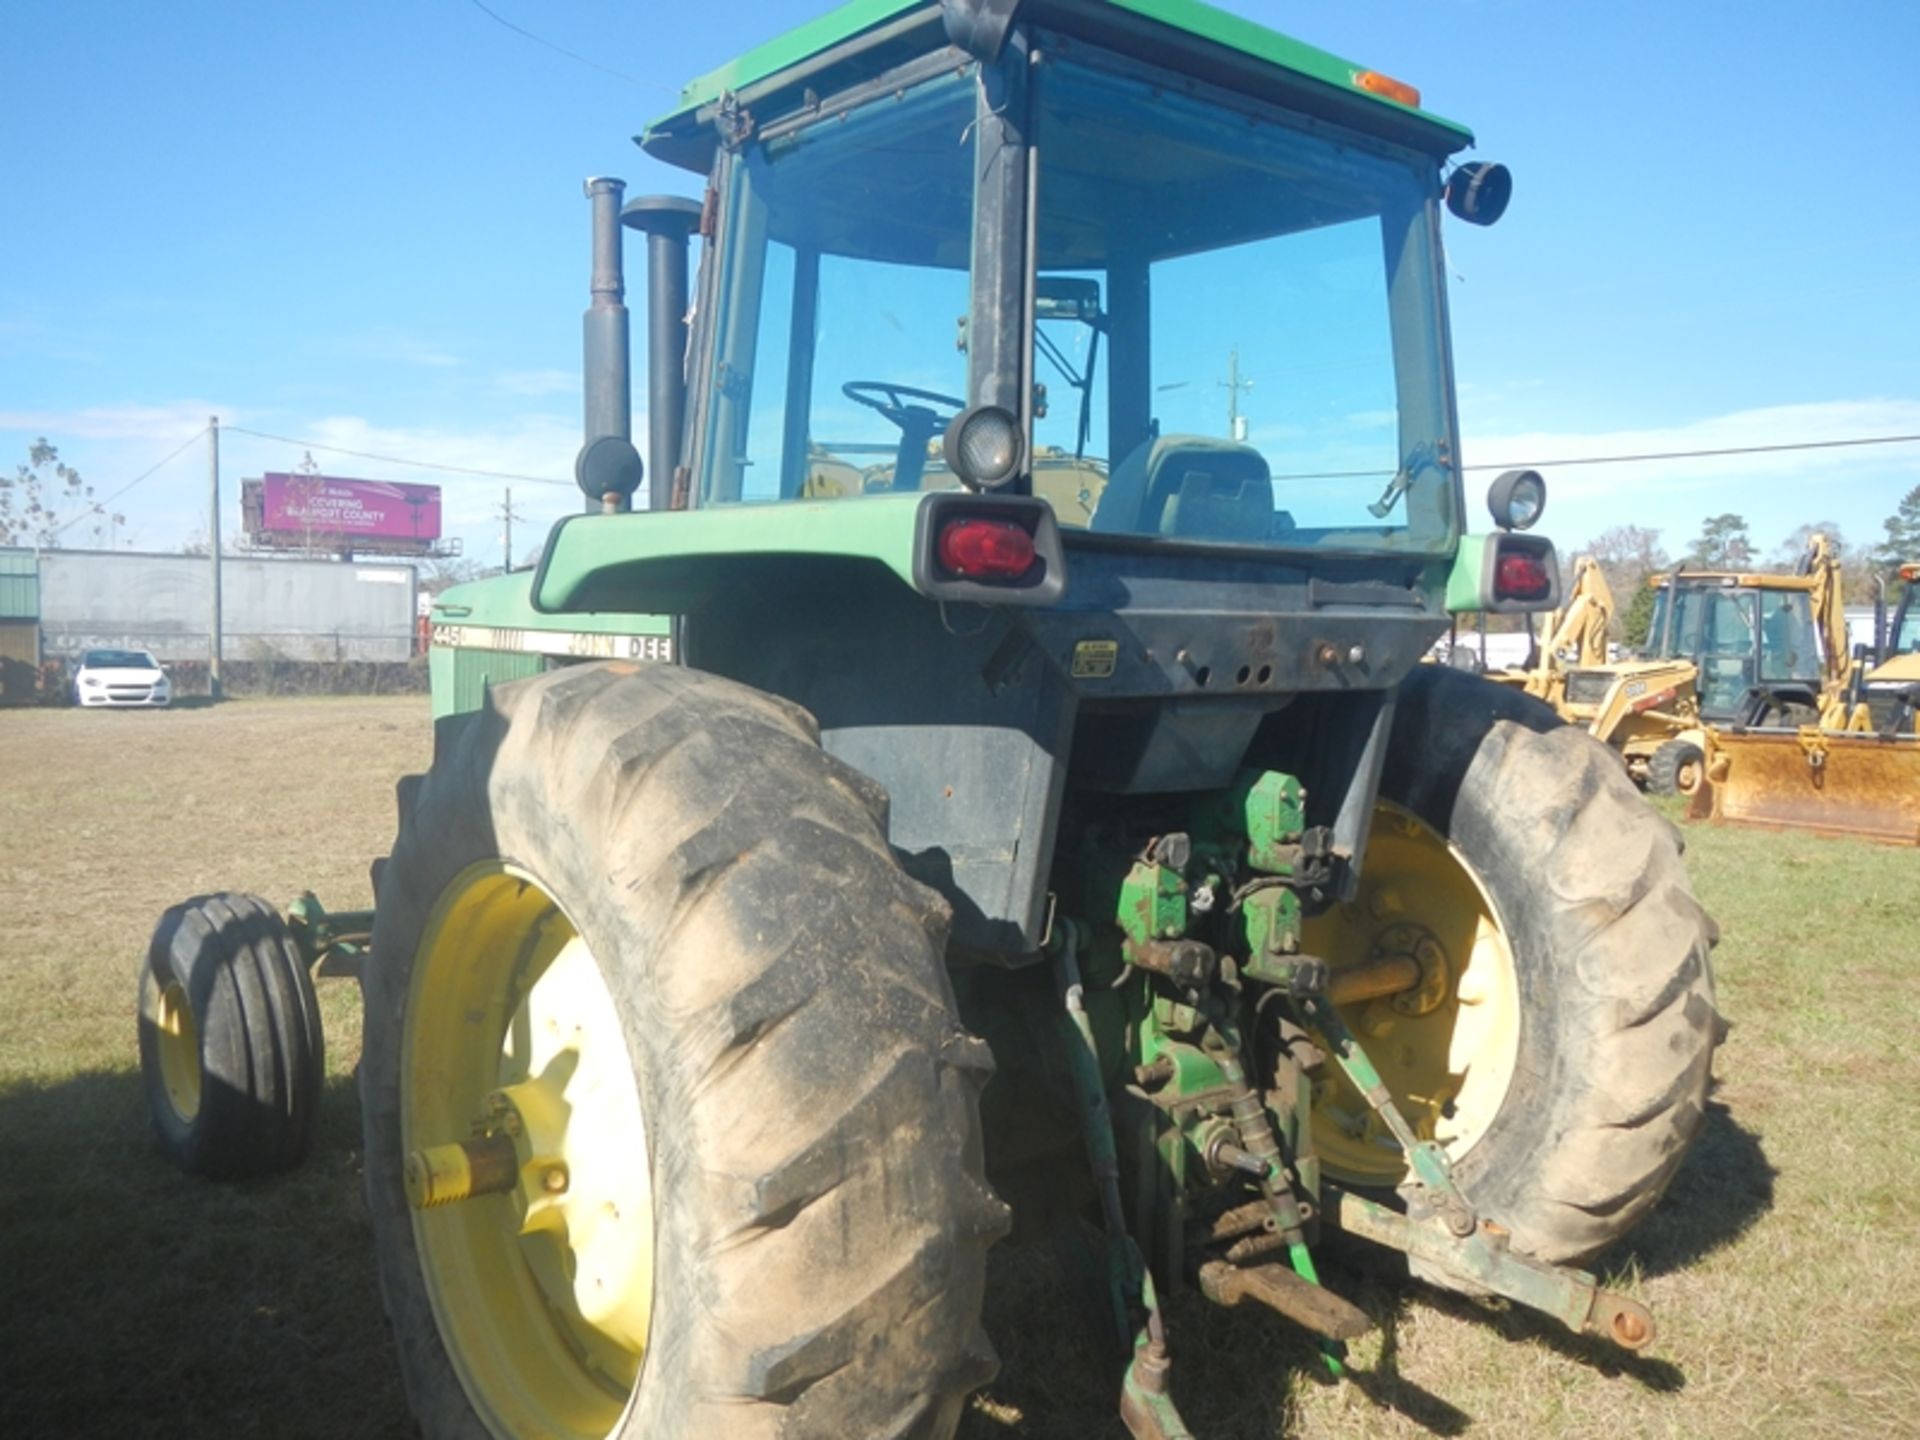 JD 4450 tractor - powershift (all hydraulics not working) - PW4450PO31162 - Image 3 of 5